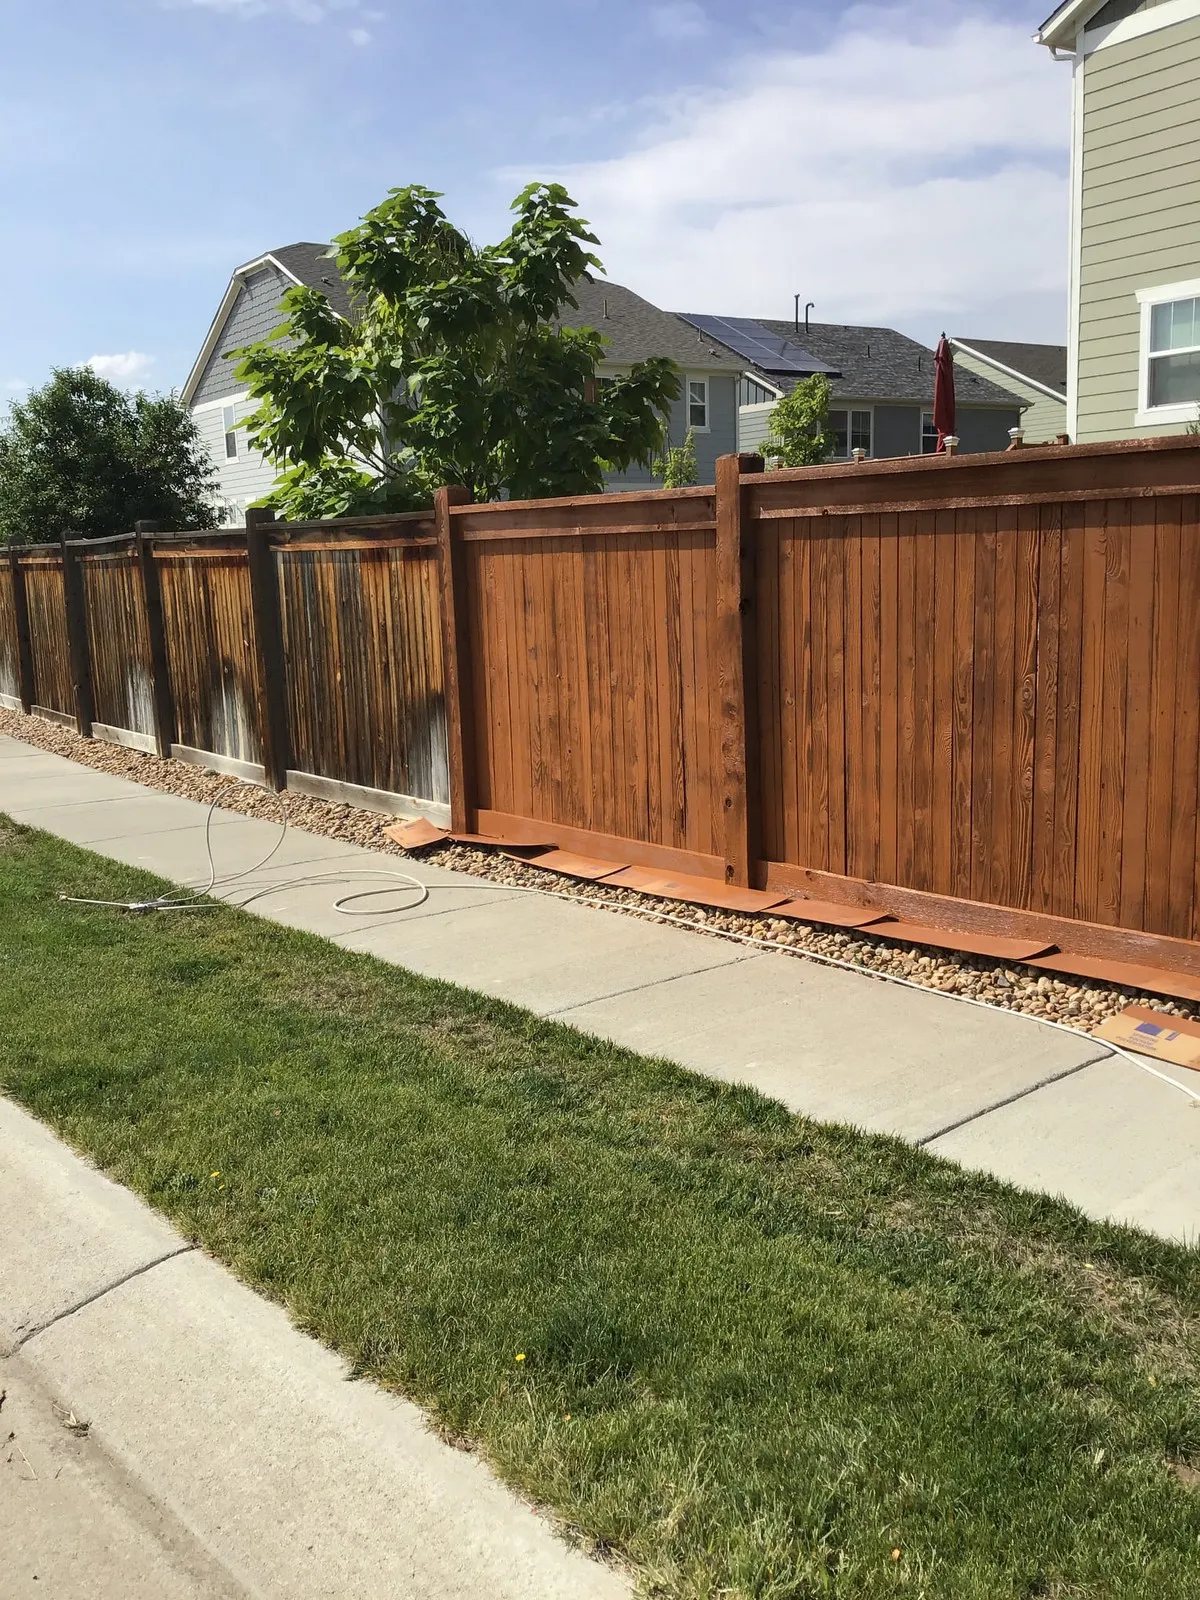 Boulder, CO fence in process of being repaired by Mr. Handyman.